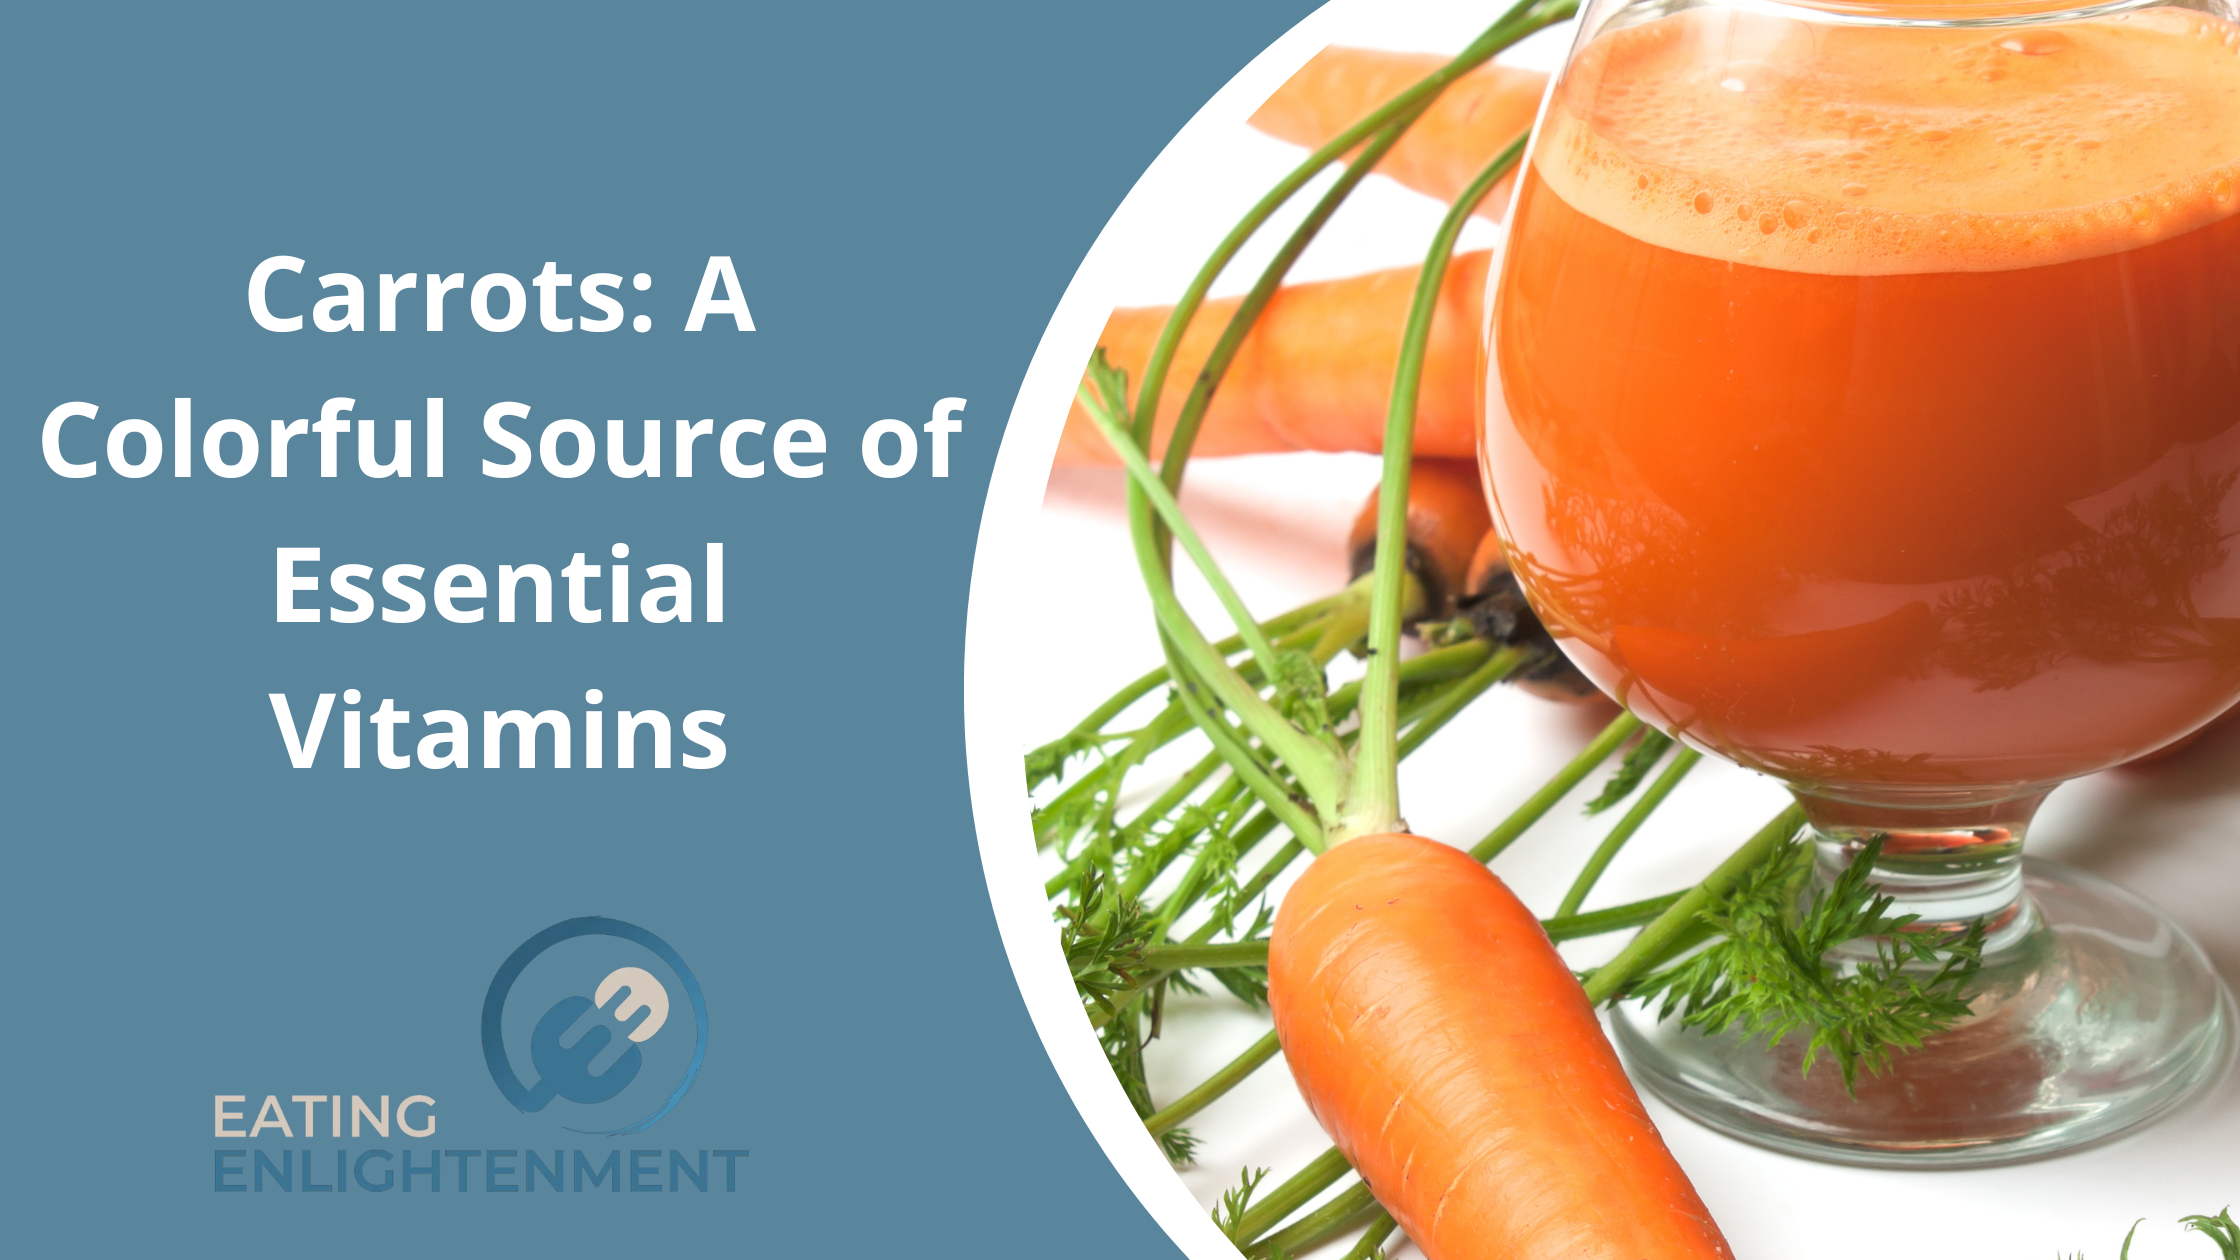 Carrots: A Colorful Source of Essential Vitamins